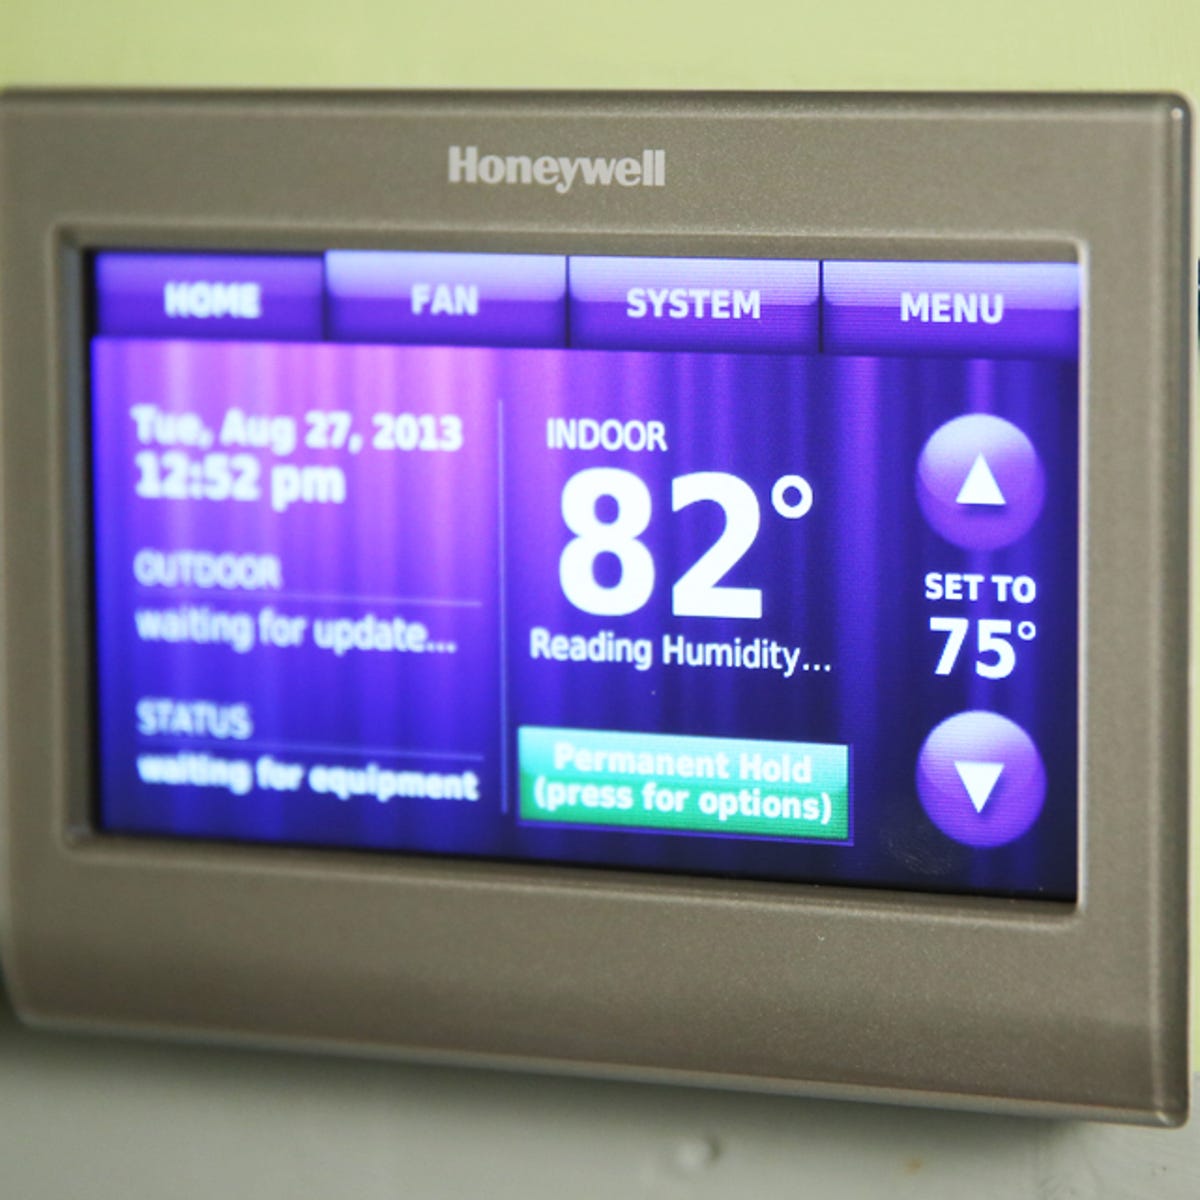 Honeywell Wi-Fi Smart Thermostat review: How does the Honeywell Wi-Fi Smart  Thermostat stack up against the popular Nest? - CNET